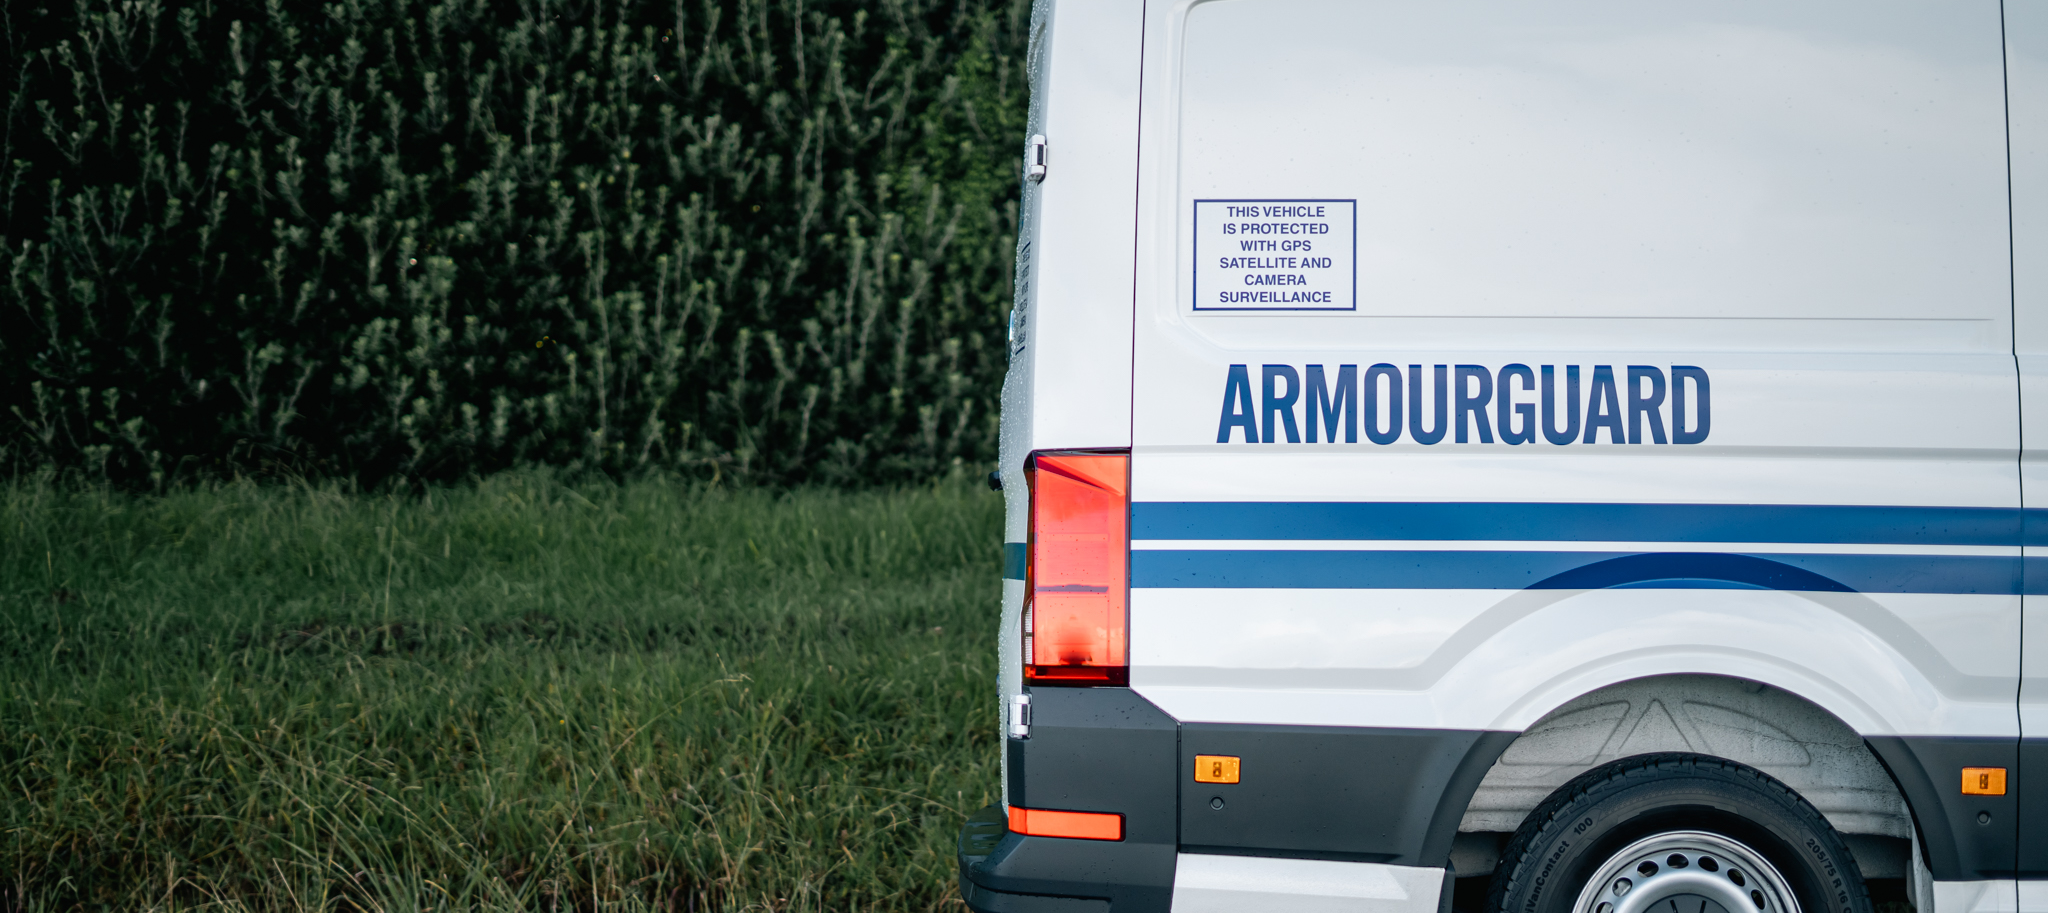 Armourguard is a highly experienced security company